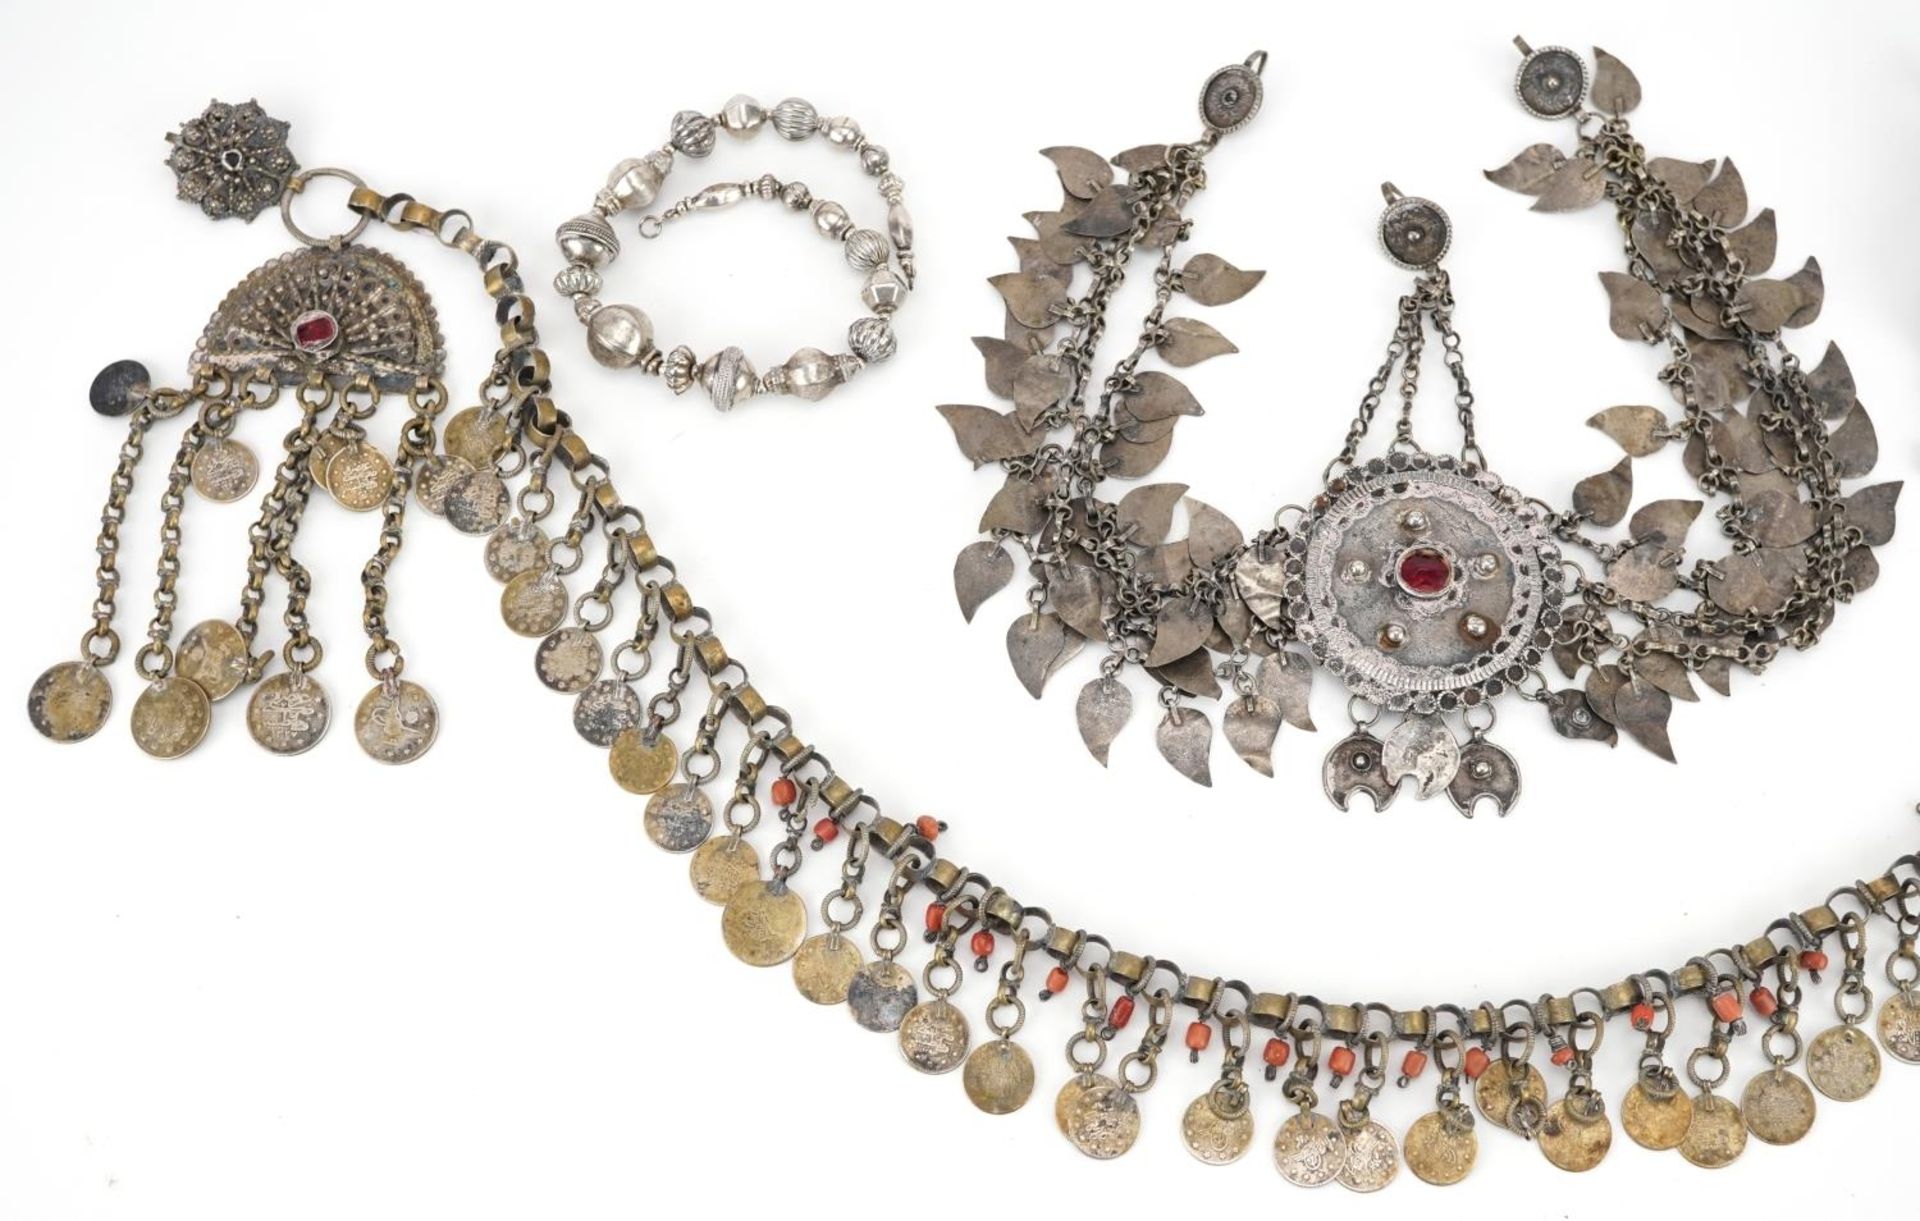 Tribal interest unmarked silver and white metal jewellery including Indian drop earring set with red - Image 2 of 4